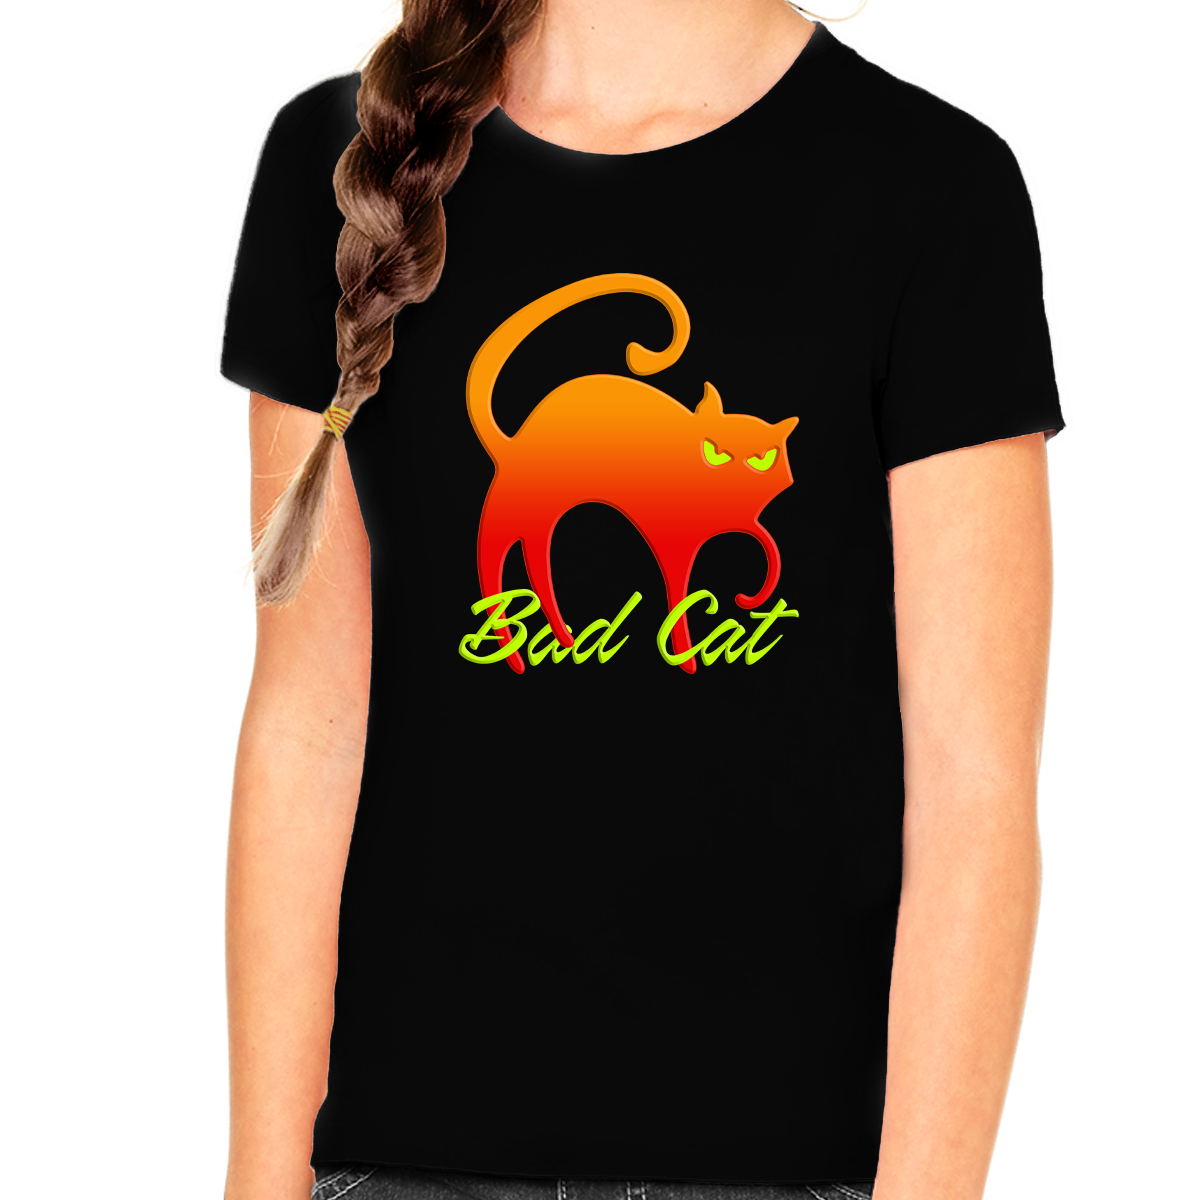 Bad Cat Shirt - Cat Shirts for Girls - Cat Gifts for Girls - Kids Cat Lover Shirts - Fire Fit Designs